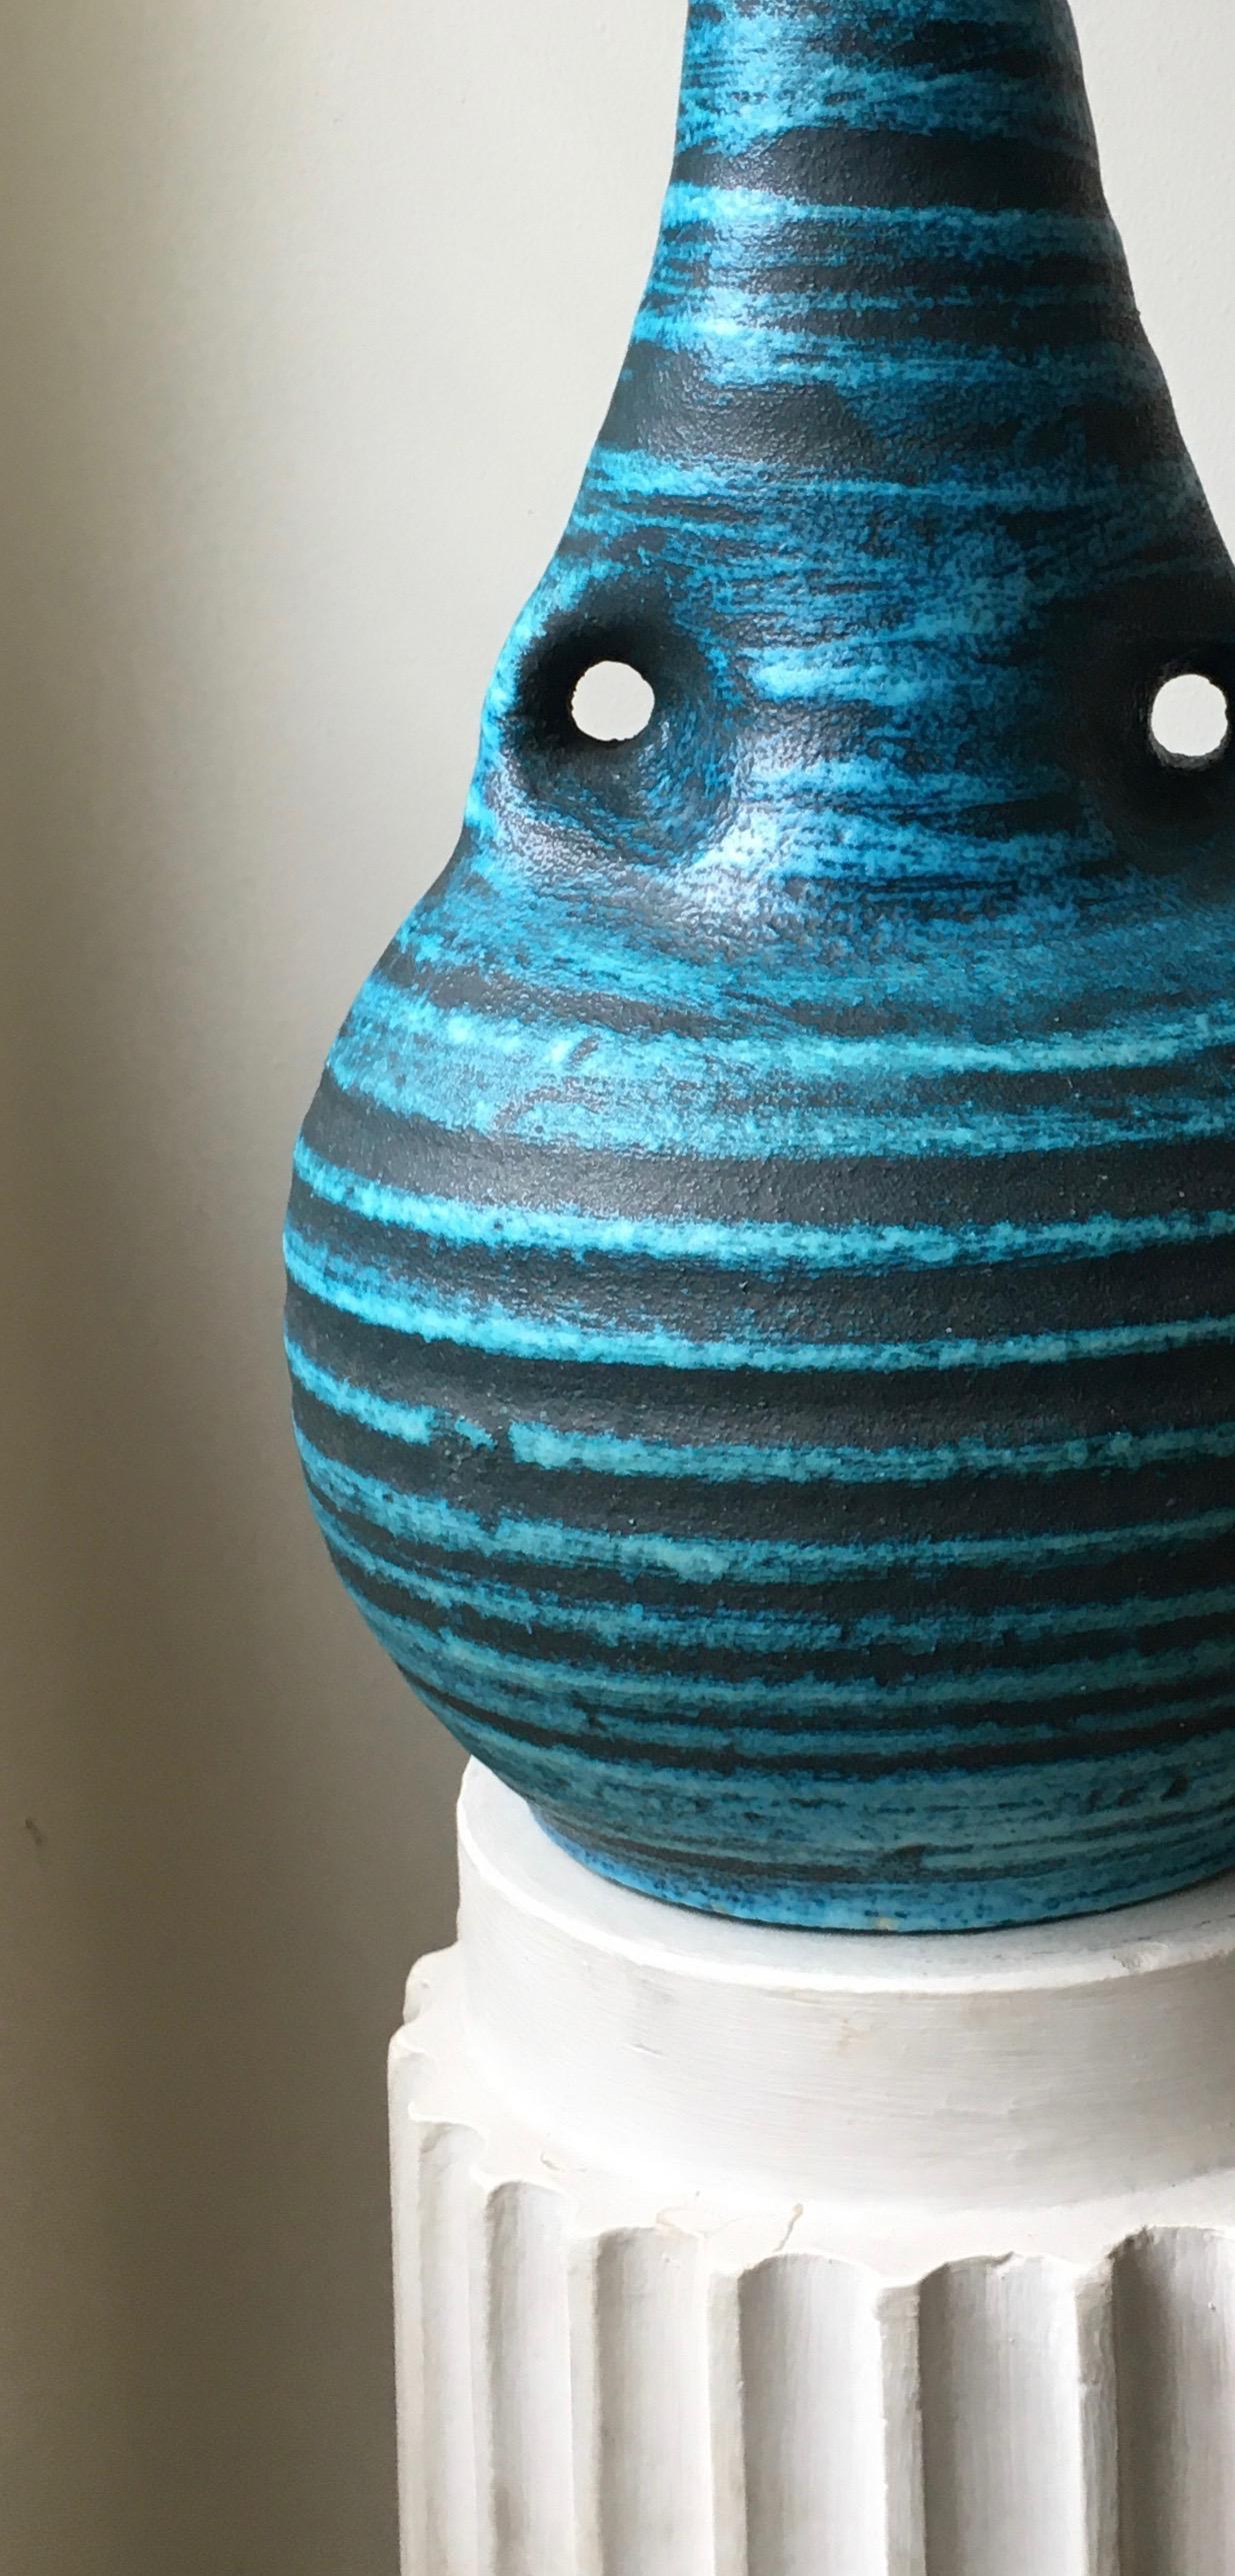 French Accolay Gauloise Blue Ceramic Vase, France, 1960 For Sale